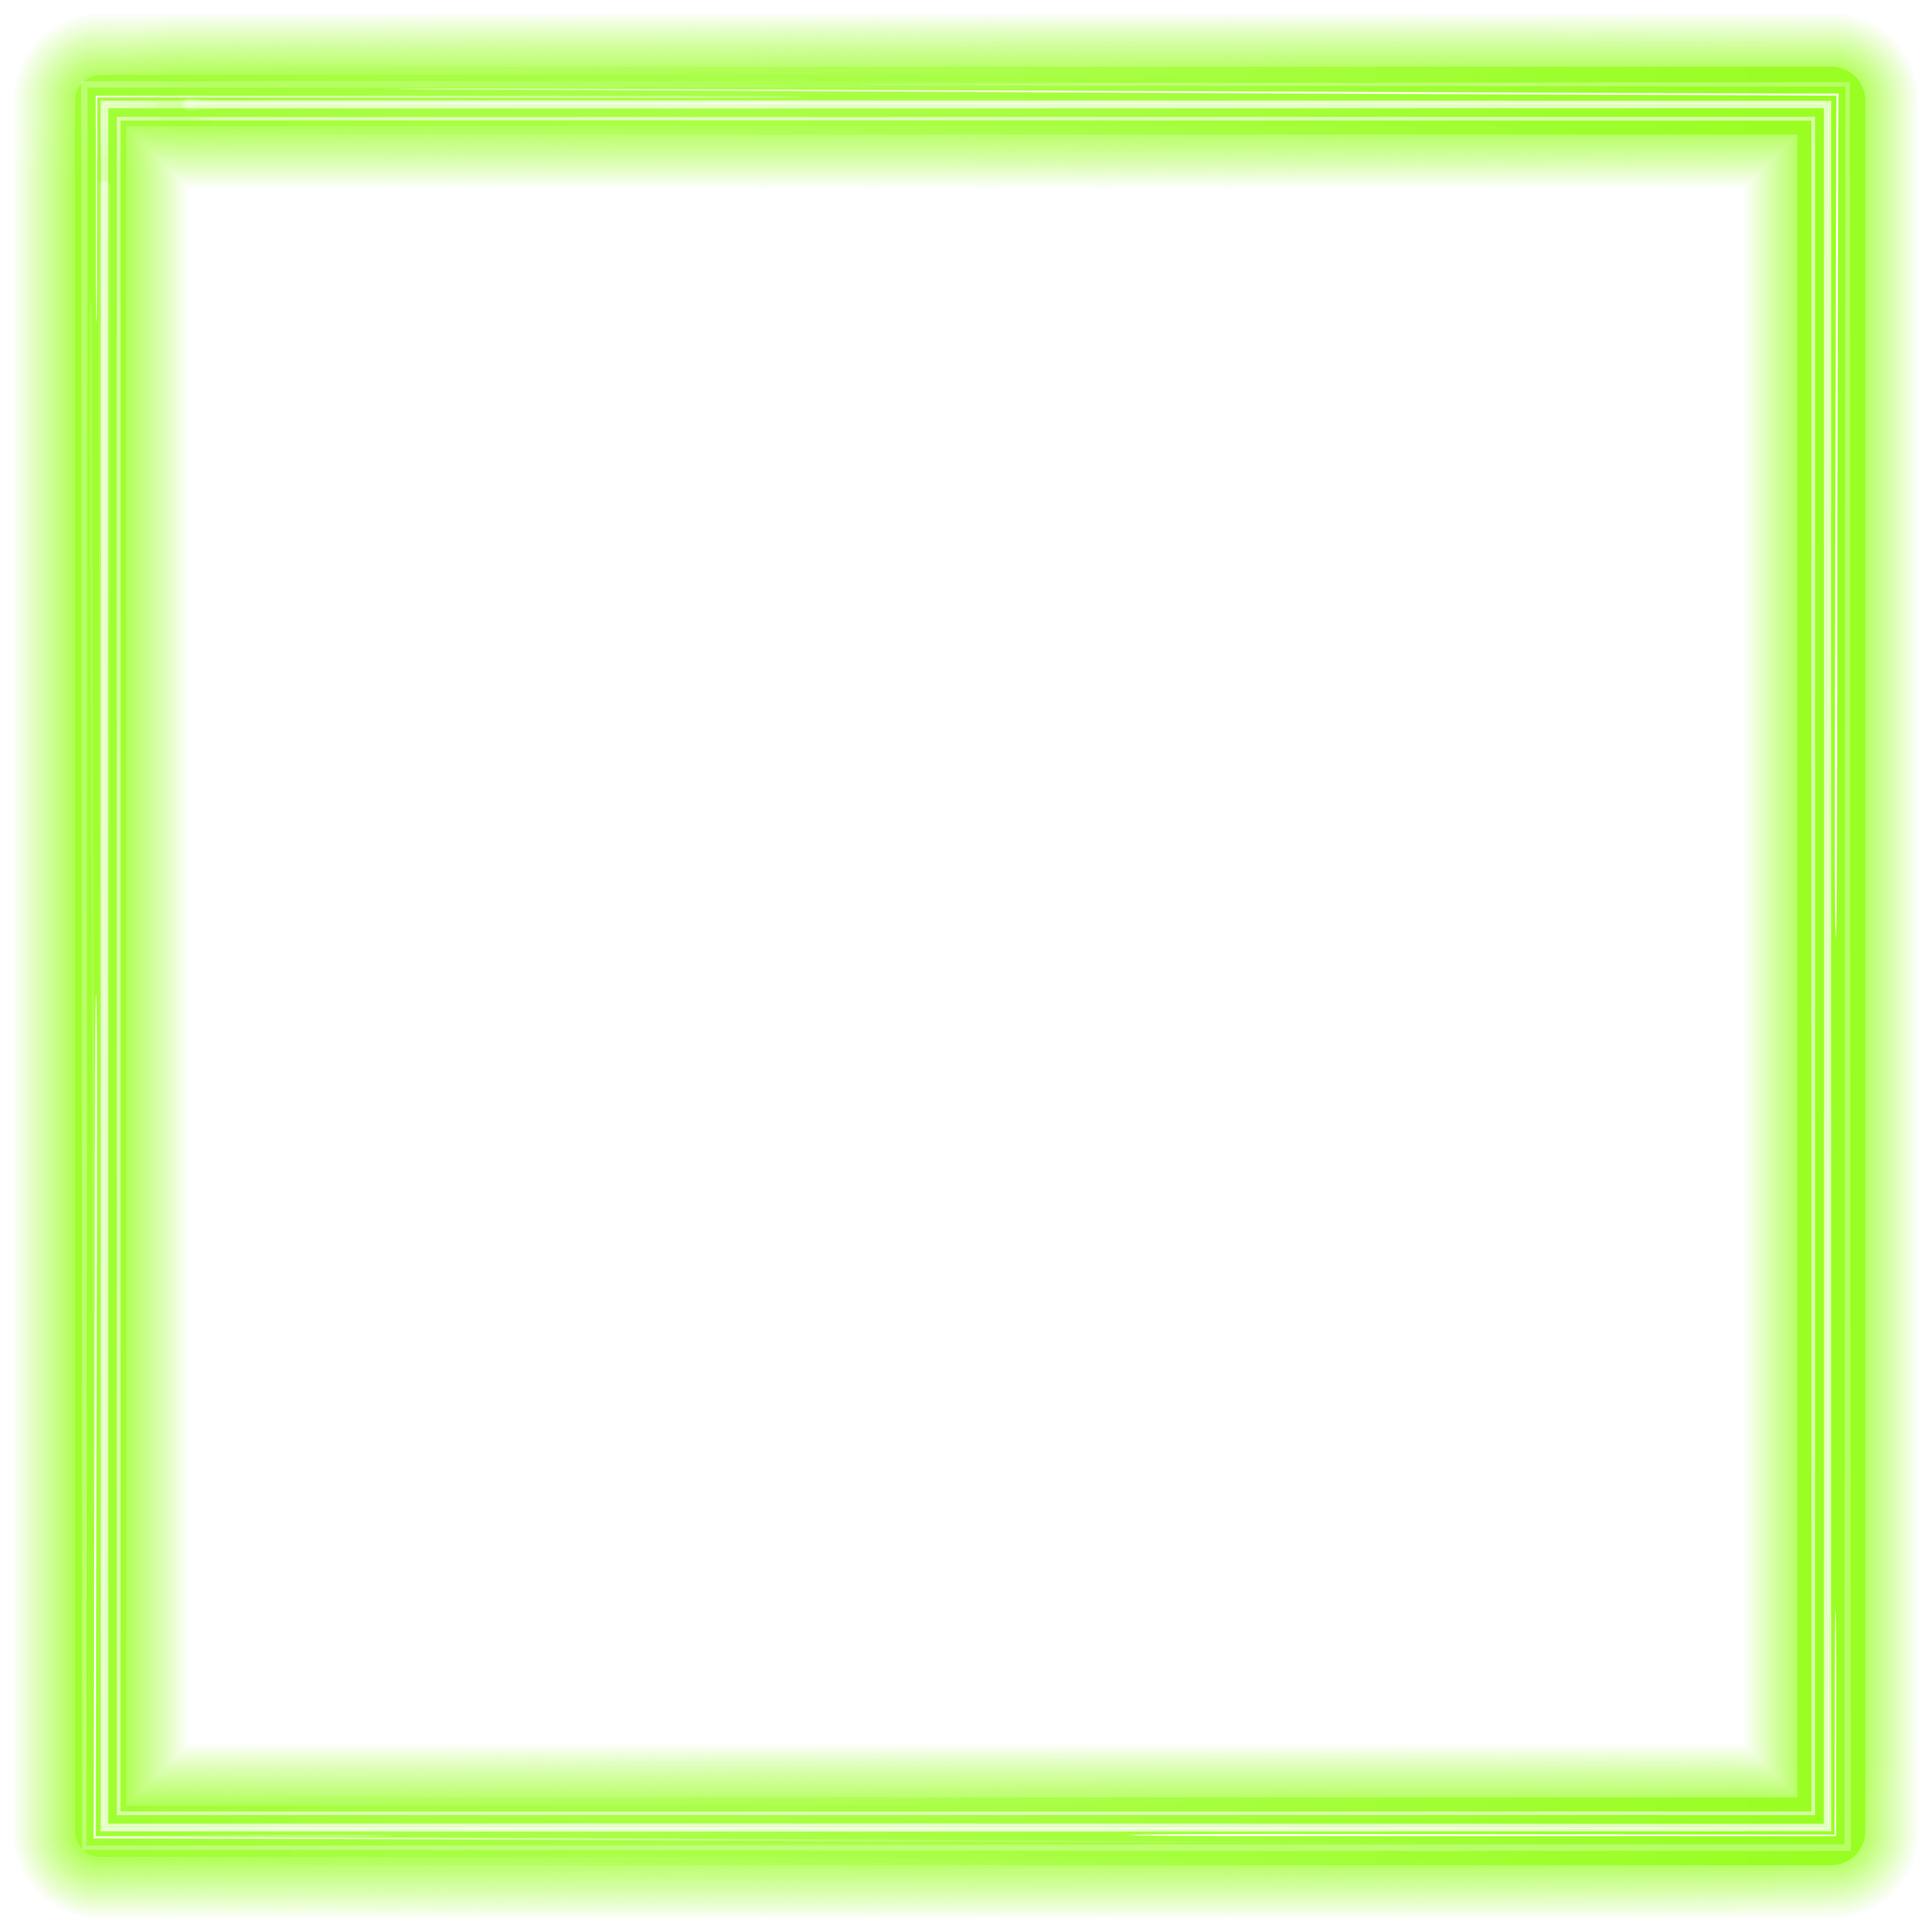 Green Neon Border Frame PNG Clipart | Gallery Yopriceville - High ...